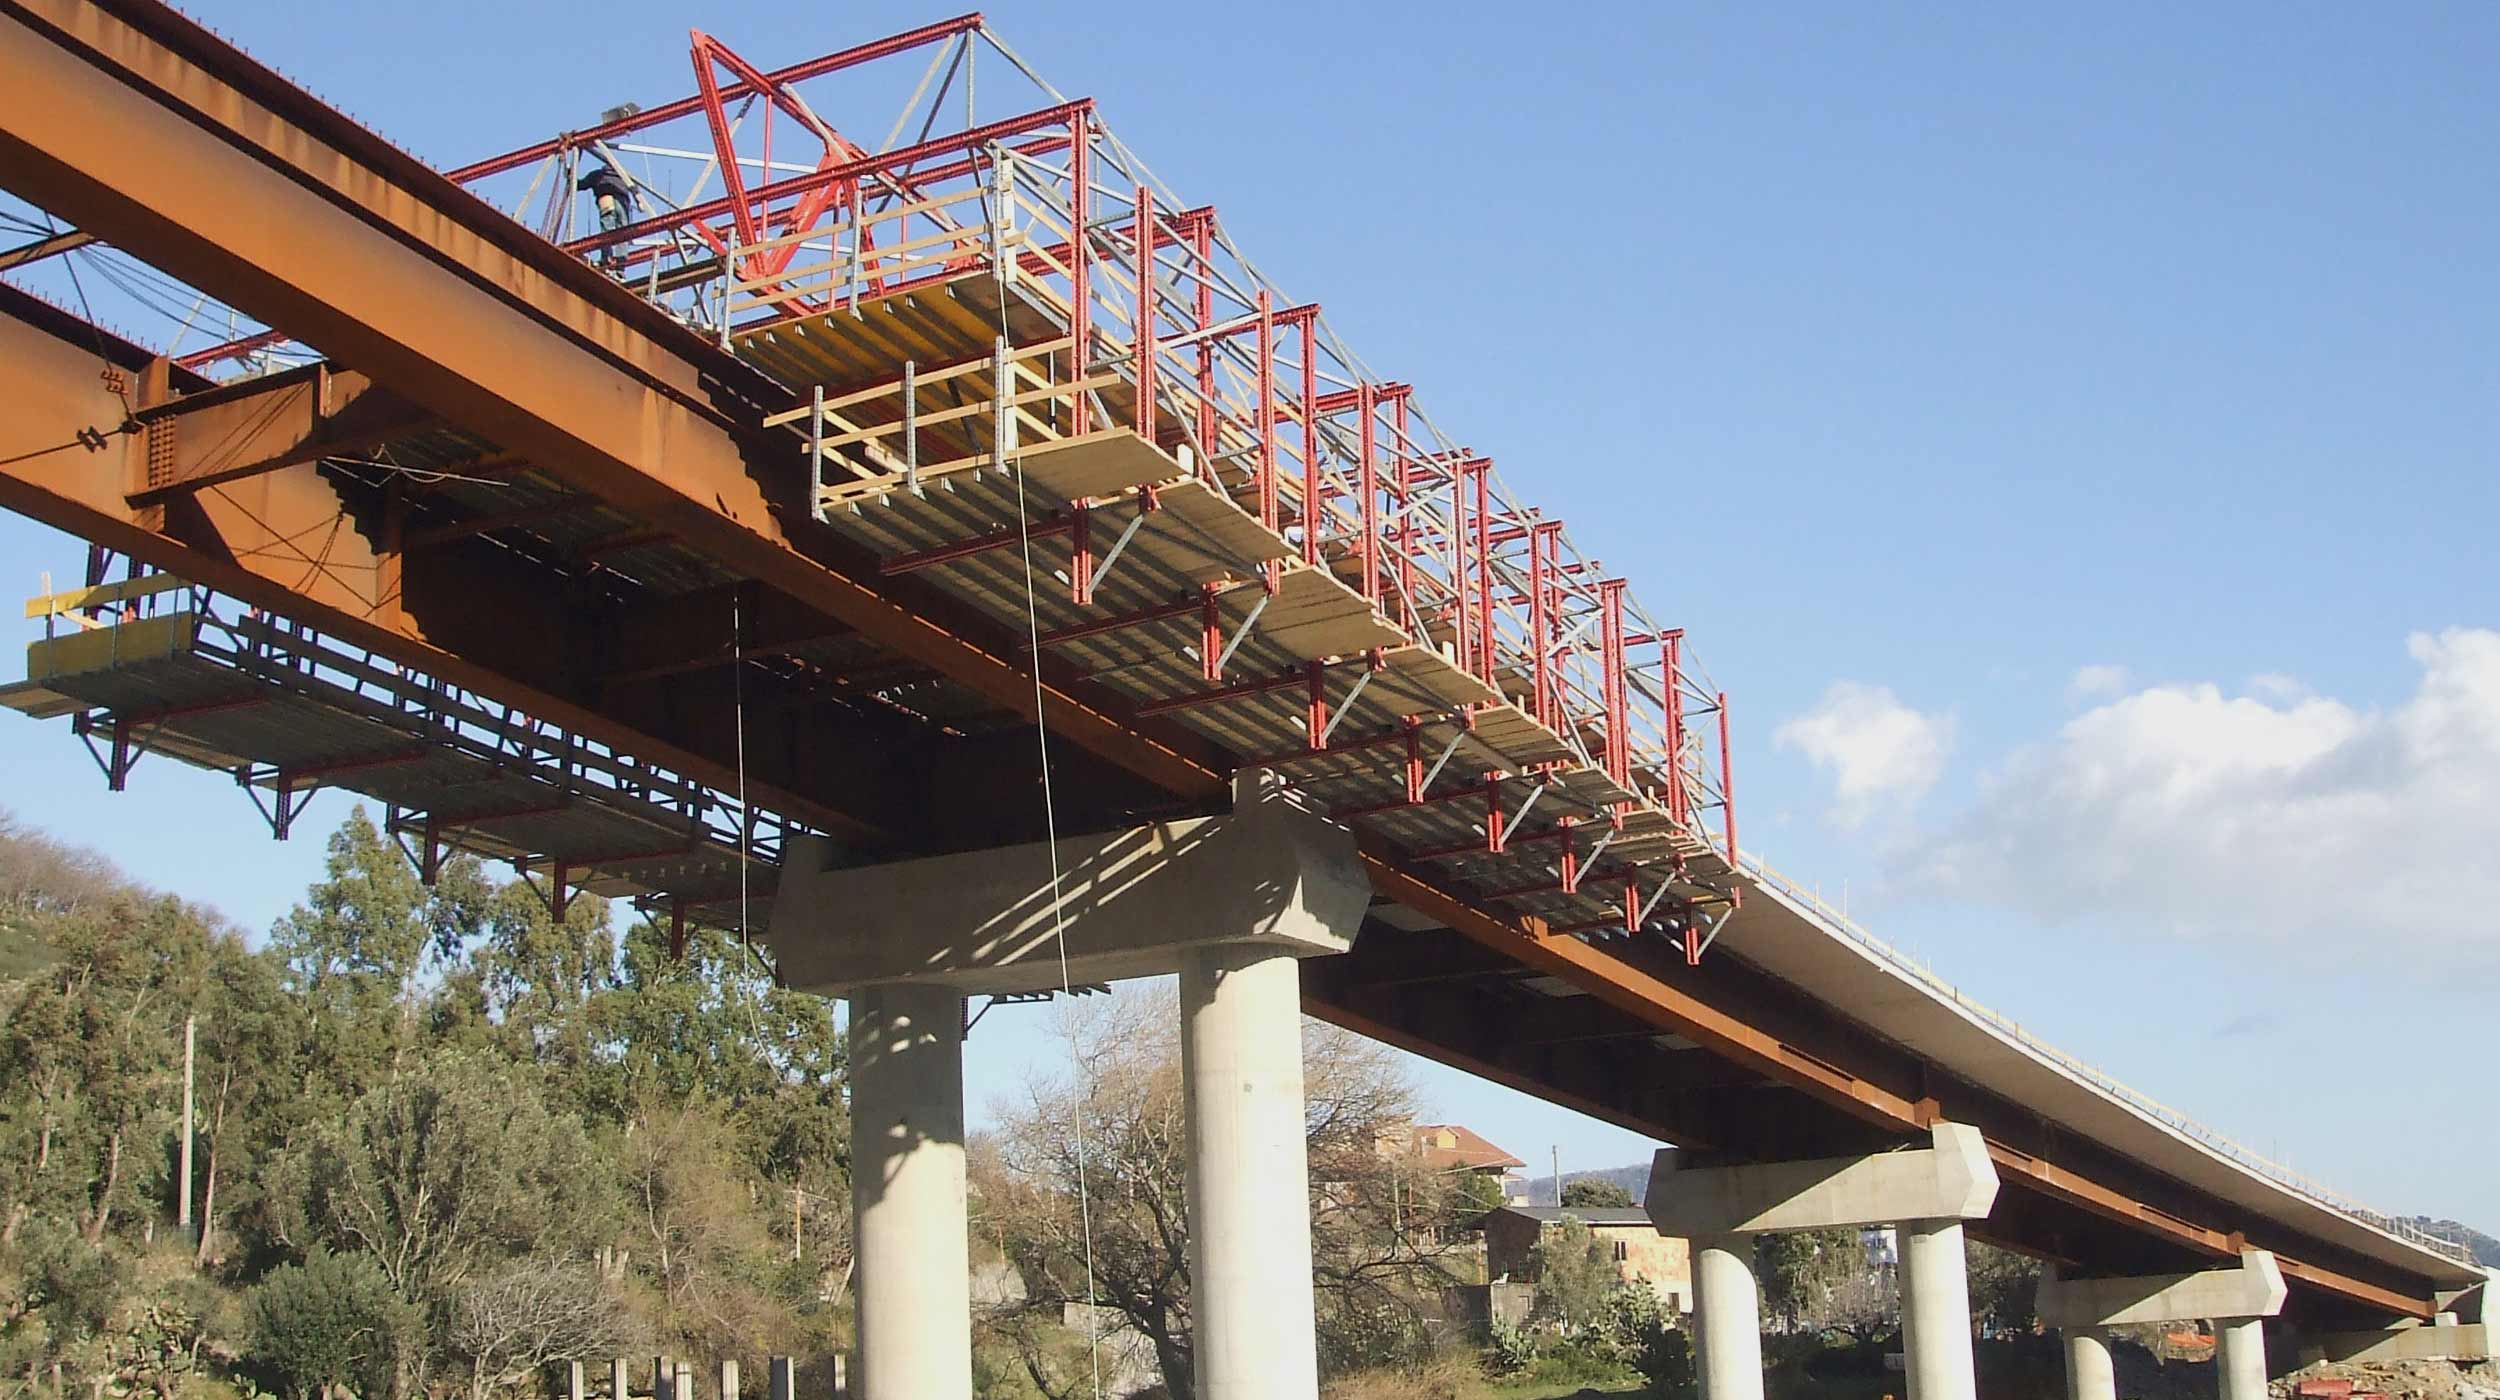 The Plati Viaduct steel-concrete composite bridge is part of the Bovolino - Bagnara motorway in Calabria, southern region of Italy. This project consists of two 320 m and 400 m long viaducts.